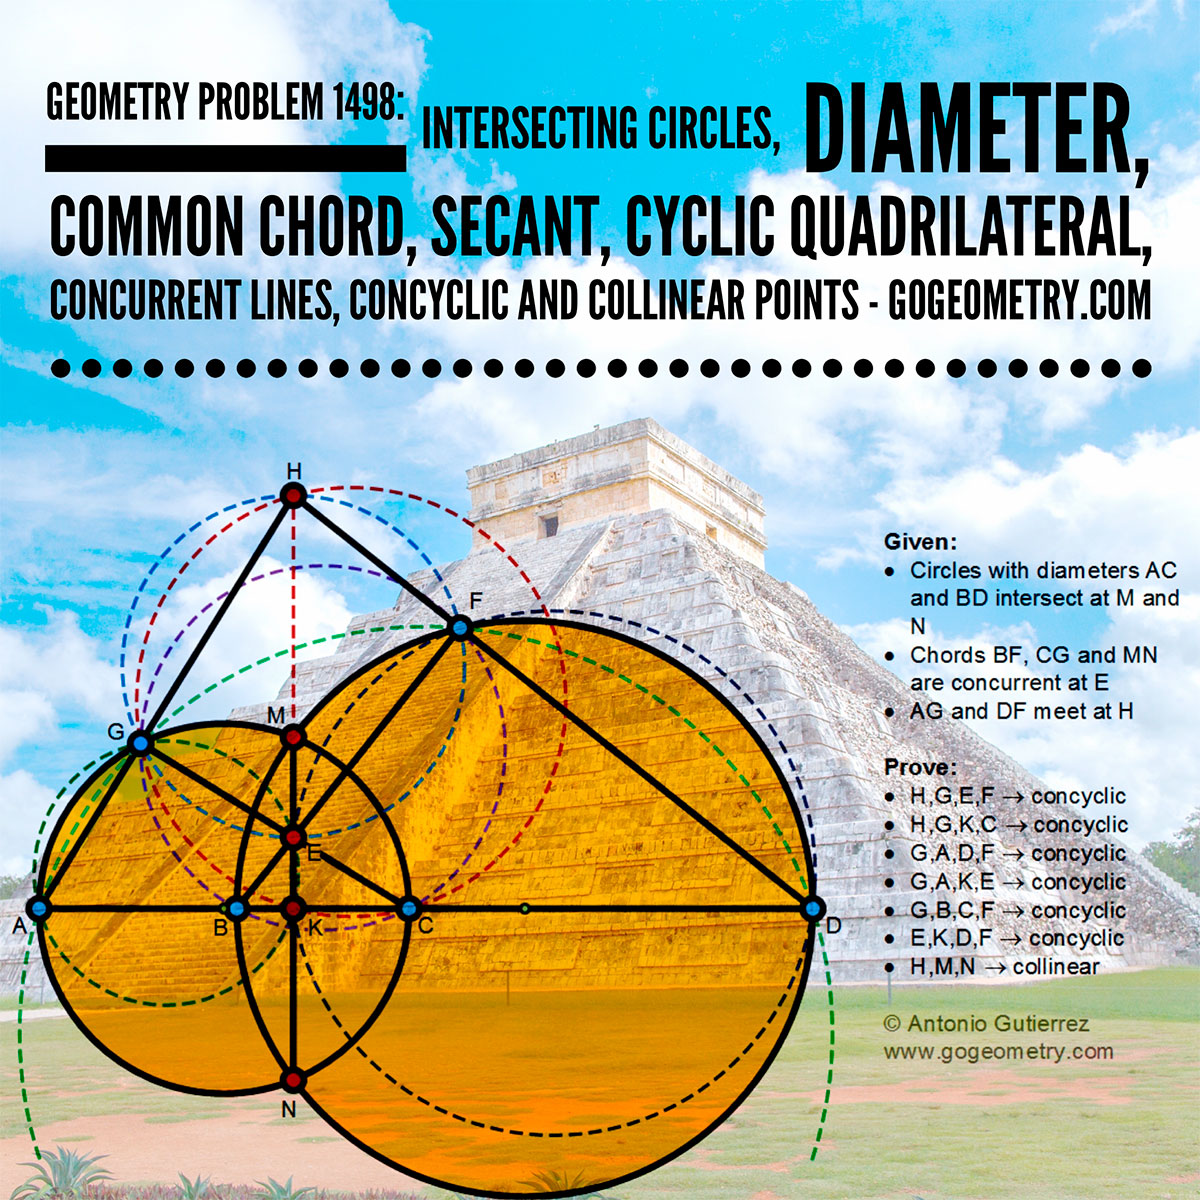 Geometry Problem 1498: Intersecting Circles, Diameter, Common Chord, Secant, Cyclic Quadrilateral, Concurrent Lines, Concyclic and Collinear Points, Chichen Itza in the background